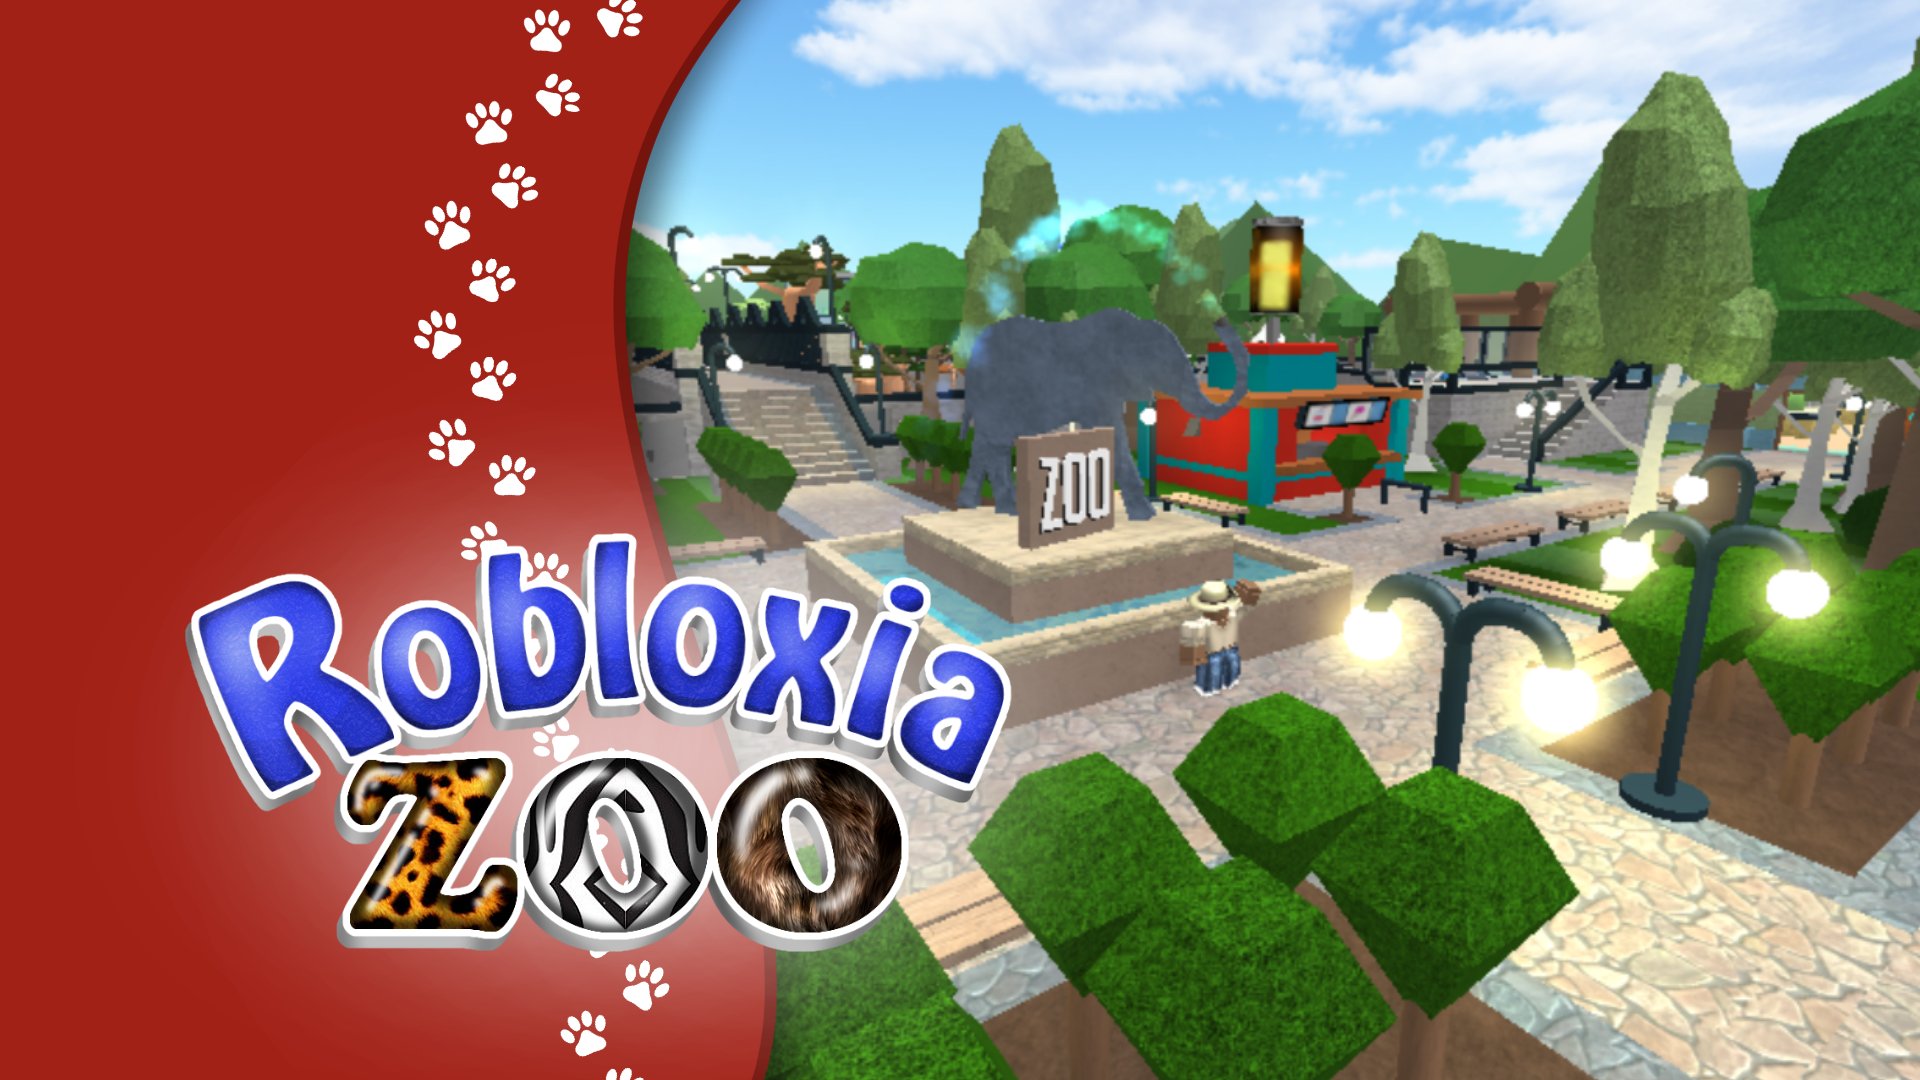 Mimi Dev On Twitter Check Out The New New Update For Robloxia Zoo All New Lobby Map Improvements And More Https T Co Fvq6zjdeof Robloxdev Roblox Https T Co Btdbv3jath - robloxia map roblox